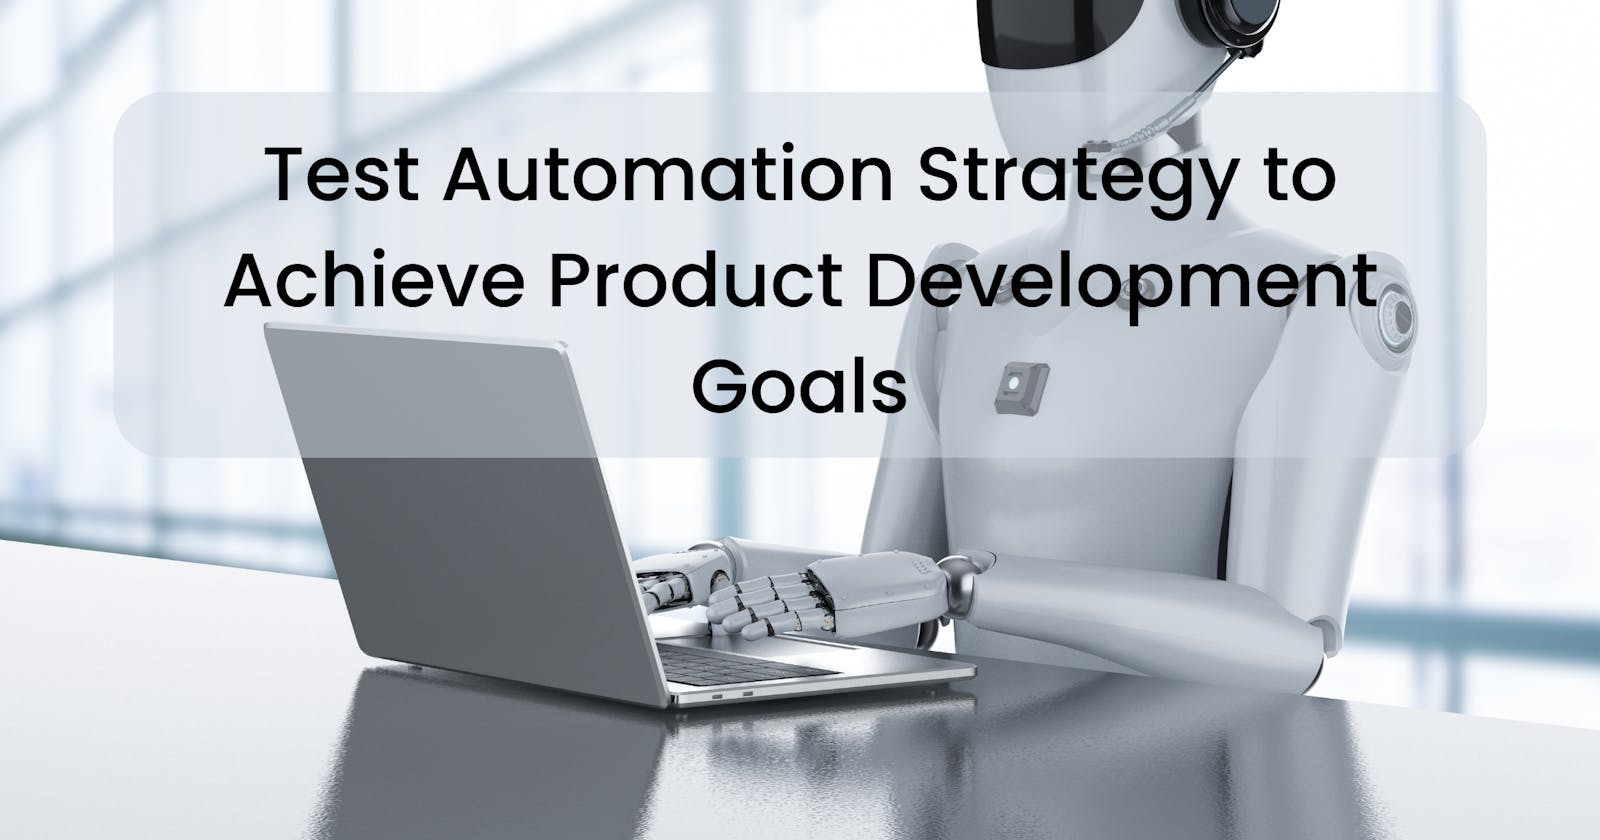 Test Automation Strategy to Achieve Product Development Goals